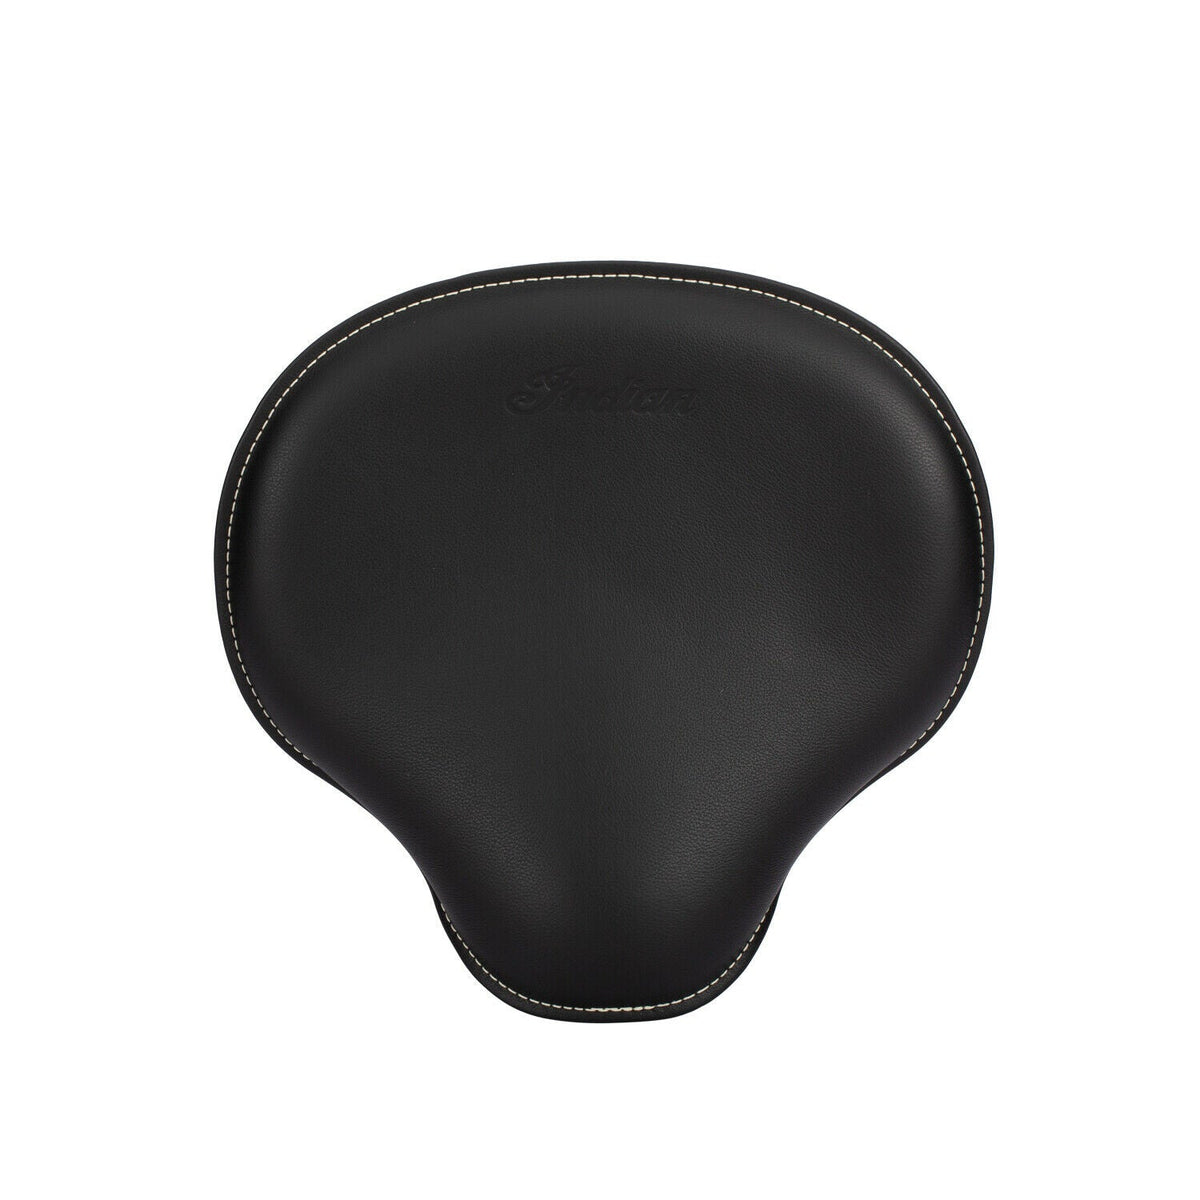 Indian Motorcycle 1920 Solo Seat, Black | 2880905-01